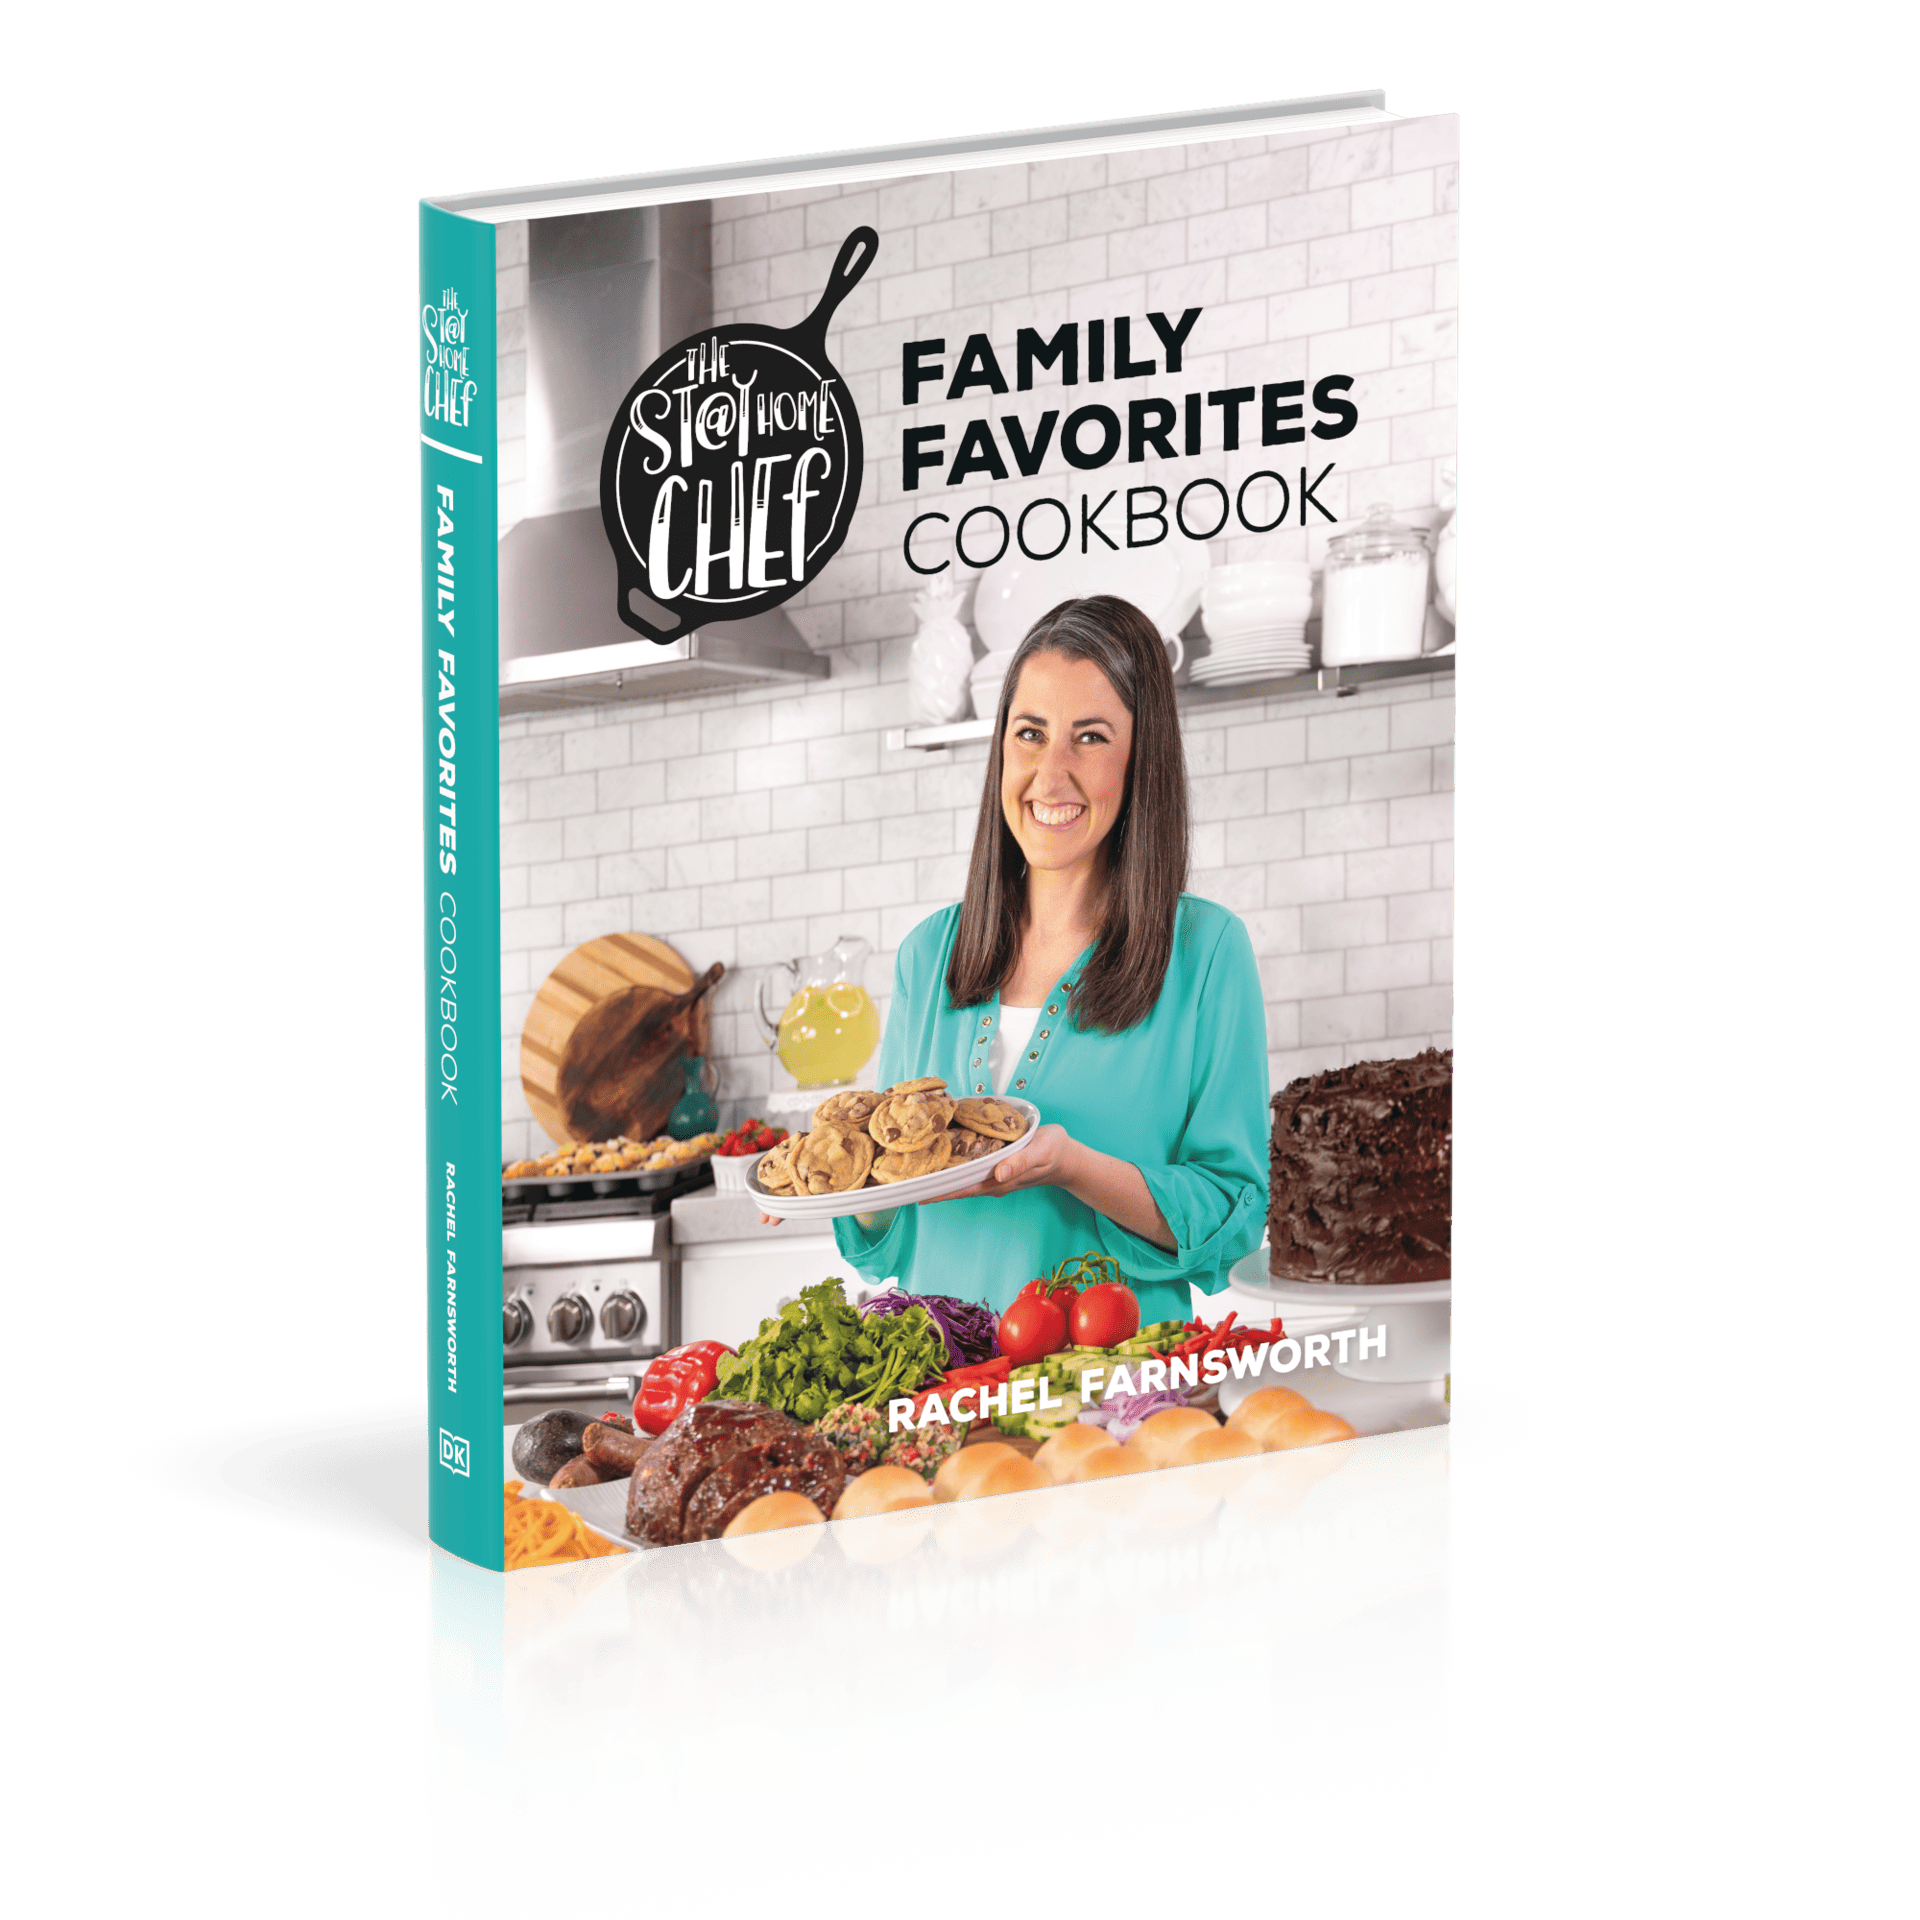 Cookbook cover for The Stay At Home Chef Family Favorites Cookbook featuring Rachel holding a plate of chocolate chip cookies surrounded by other prepared recipes from the book.